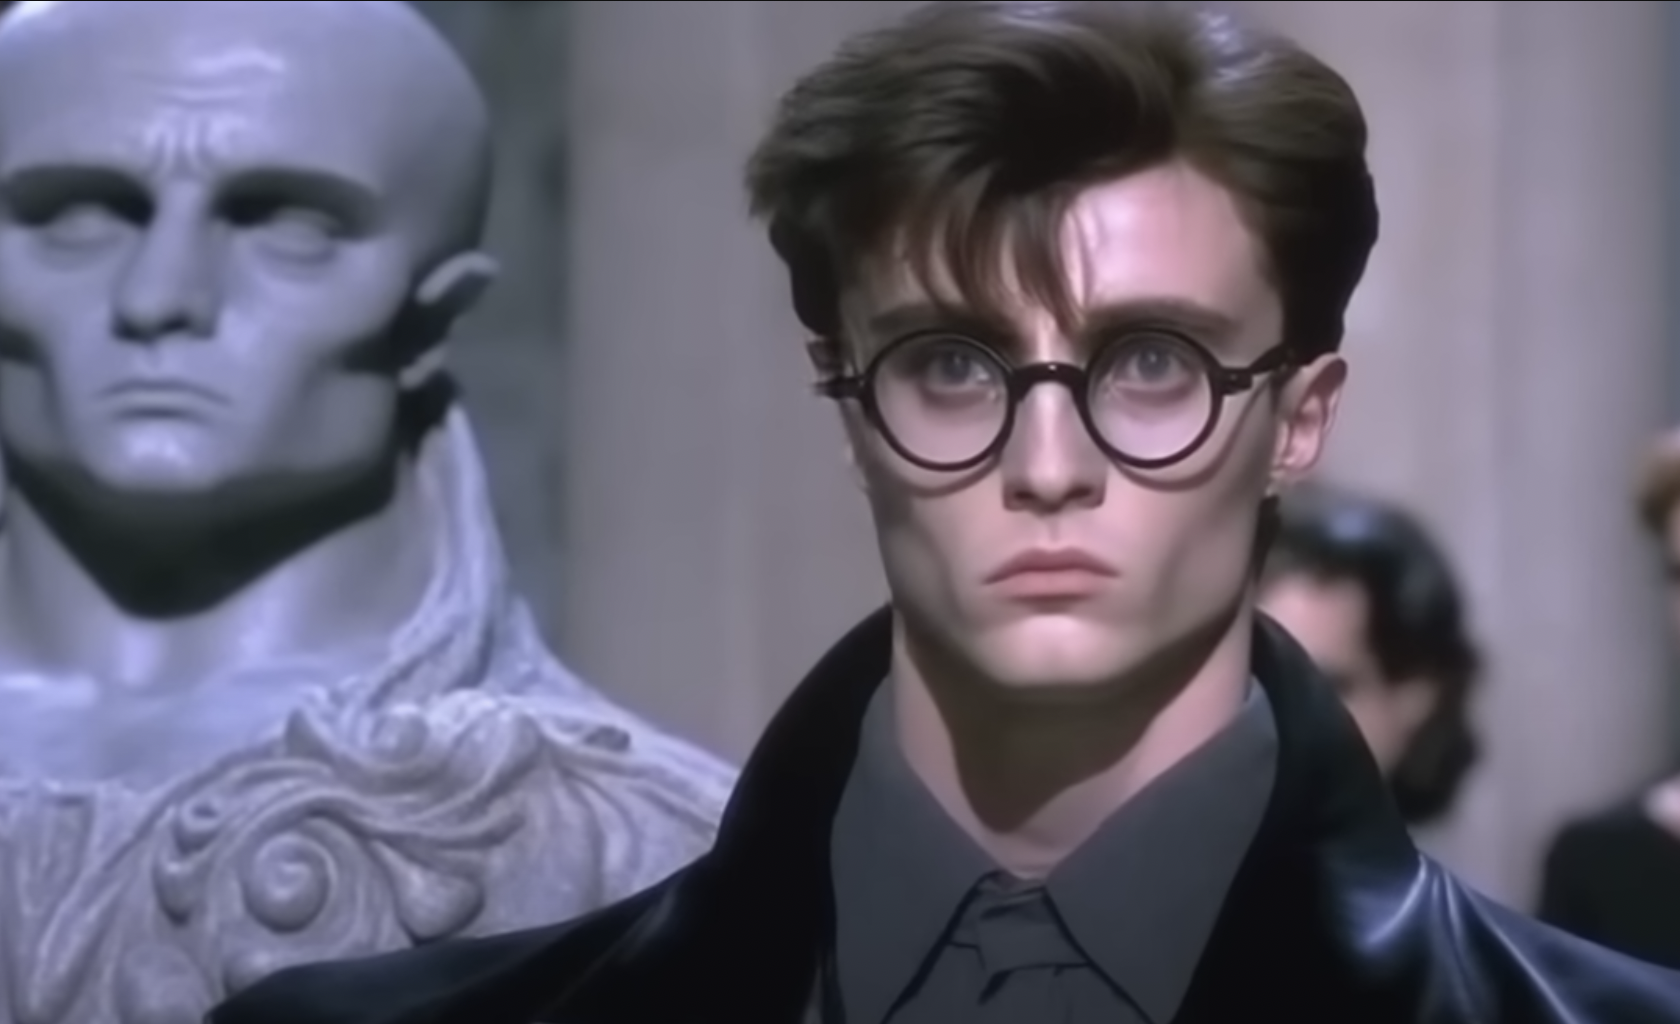 An AI-generated image of Harry Potter as a runway model.